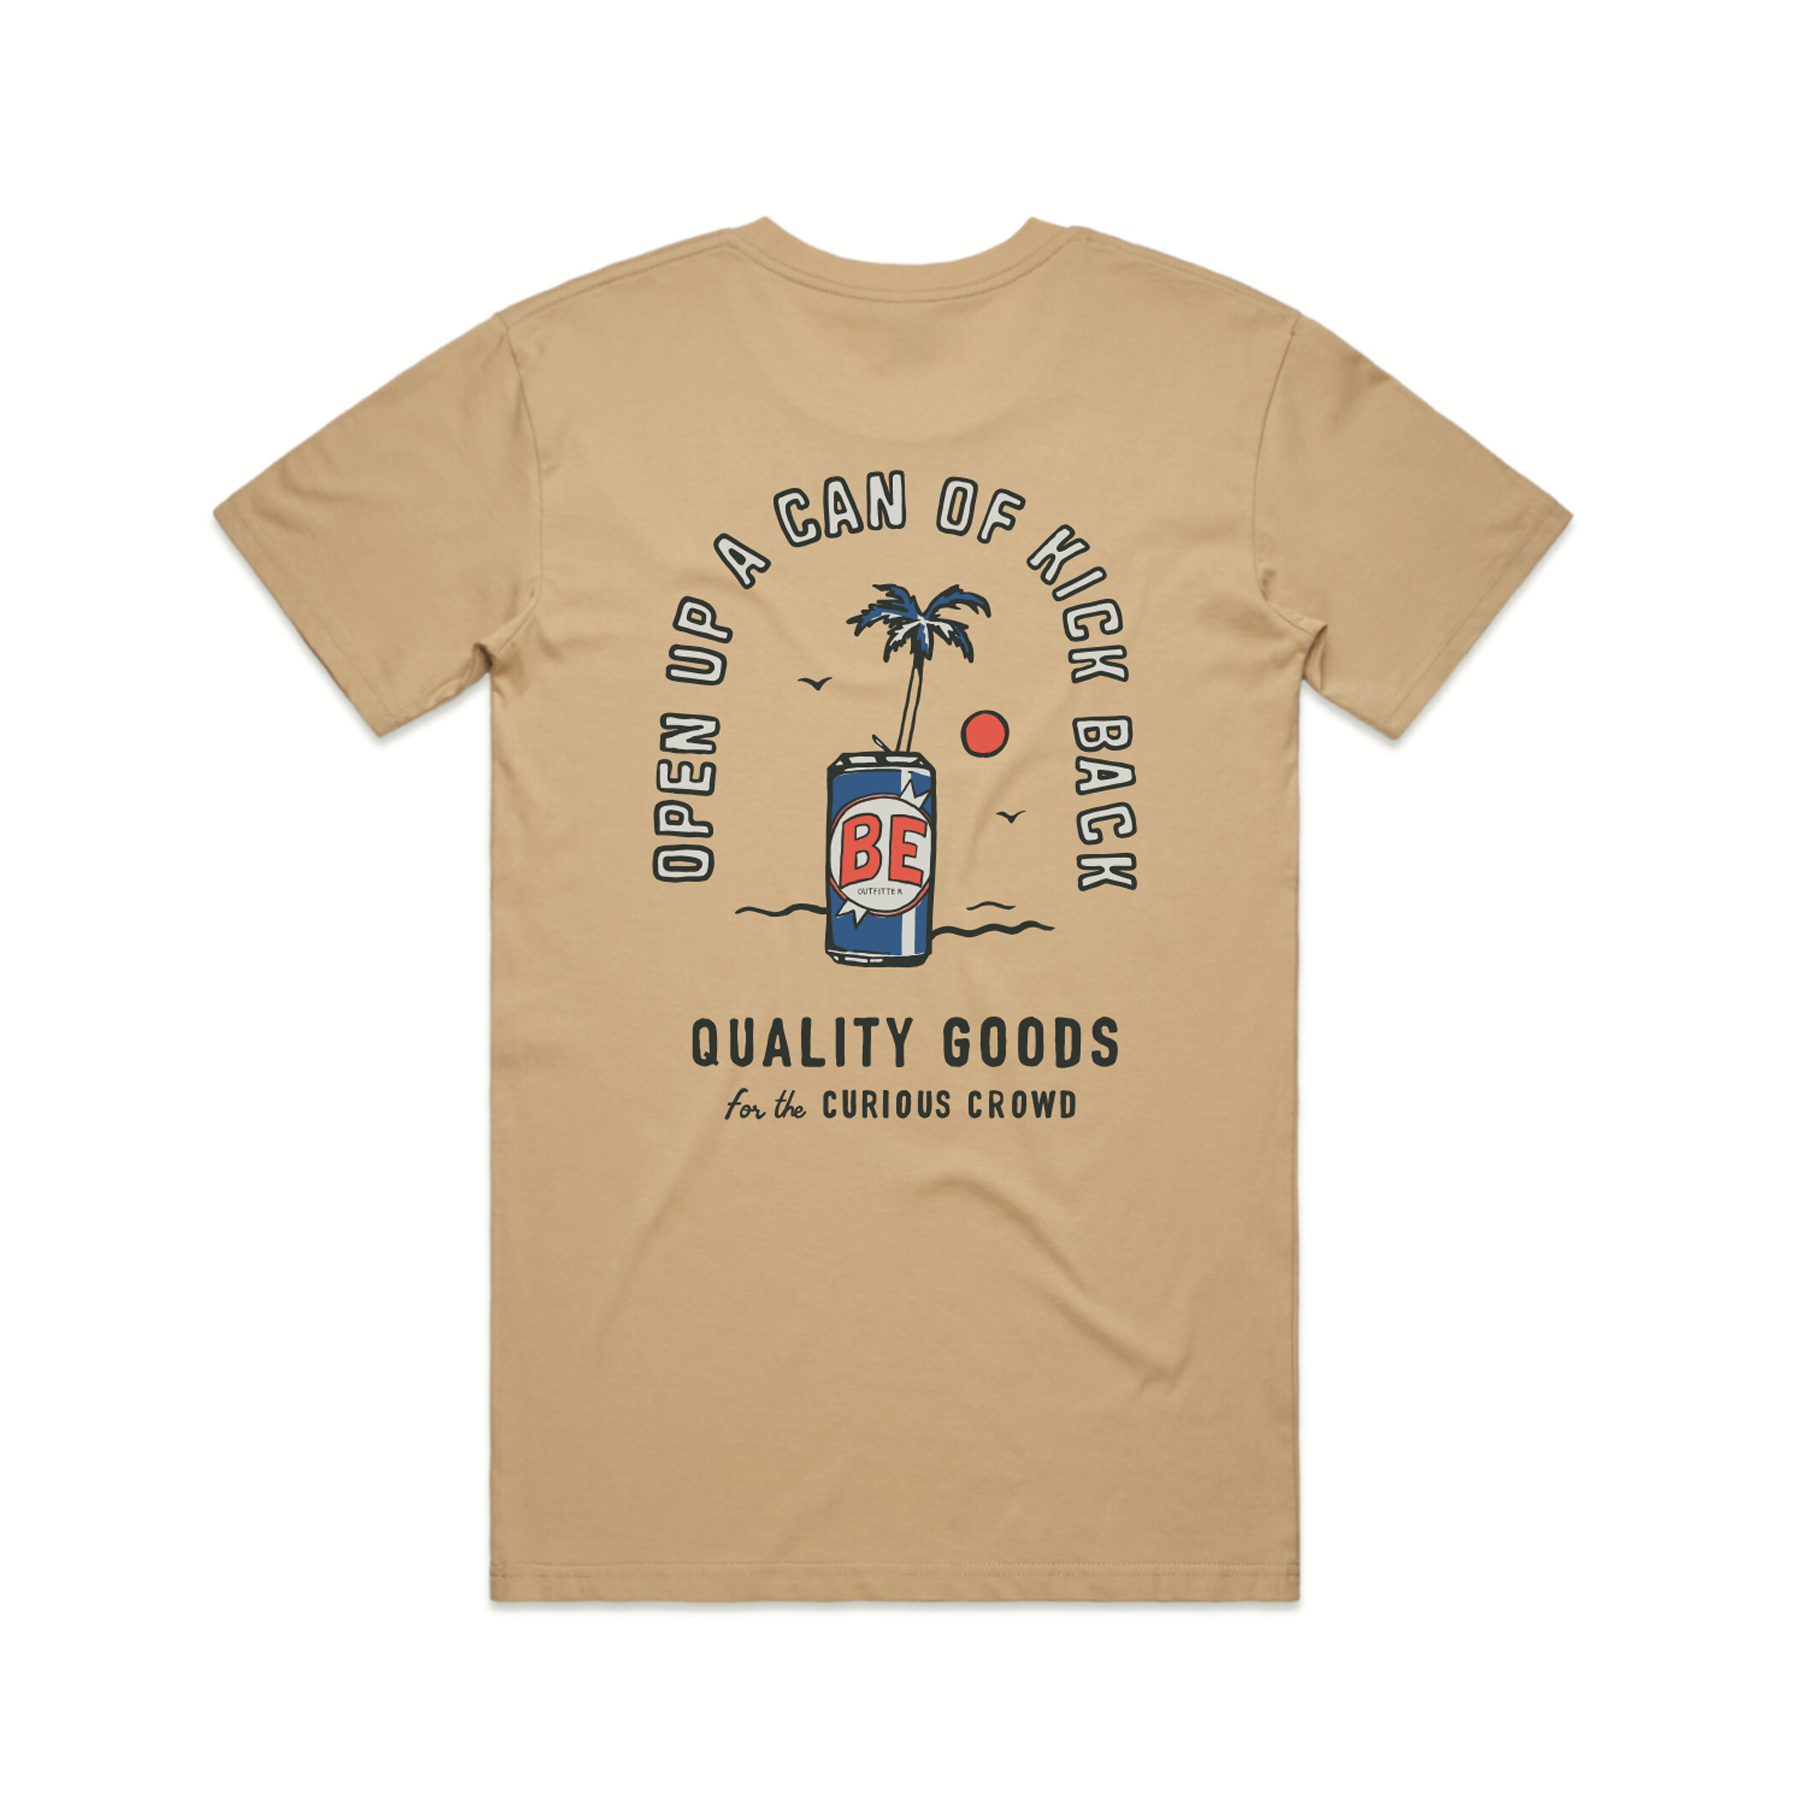 Back of tan kick back shirt with a BE can and palm tree sprouting out of the opening. Text in an arch above says open up a can of kick back.